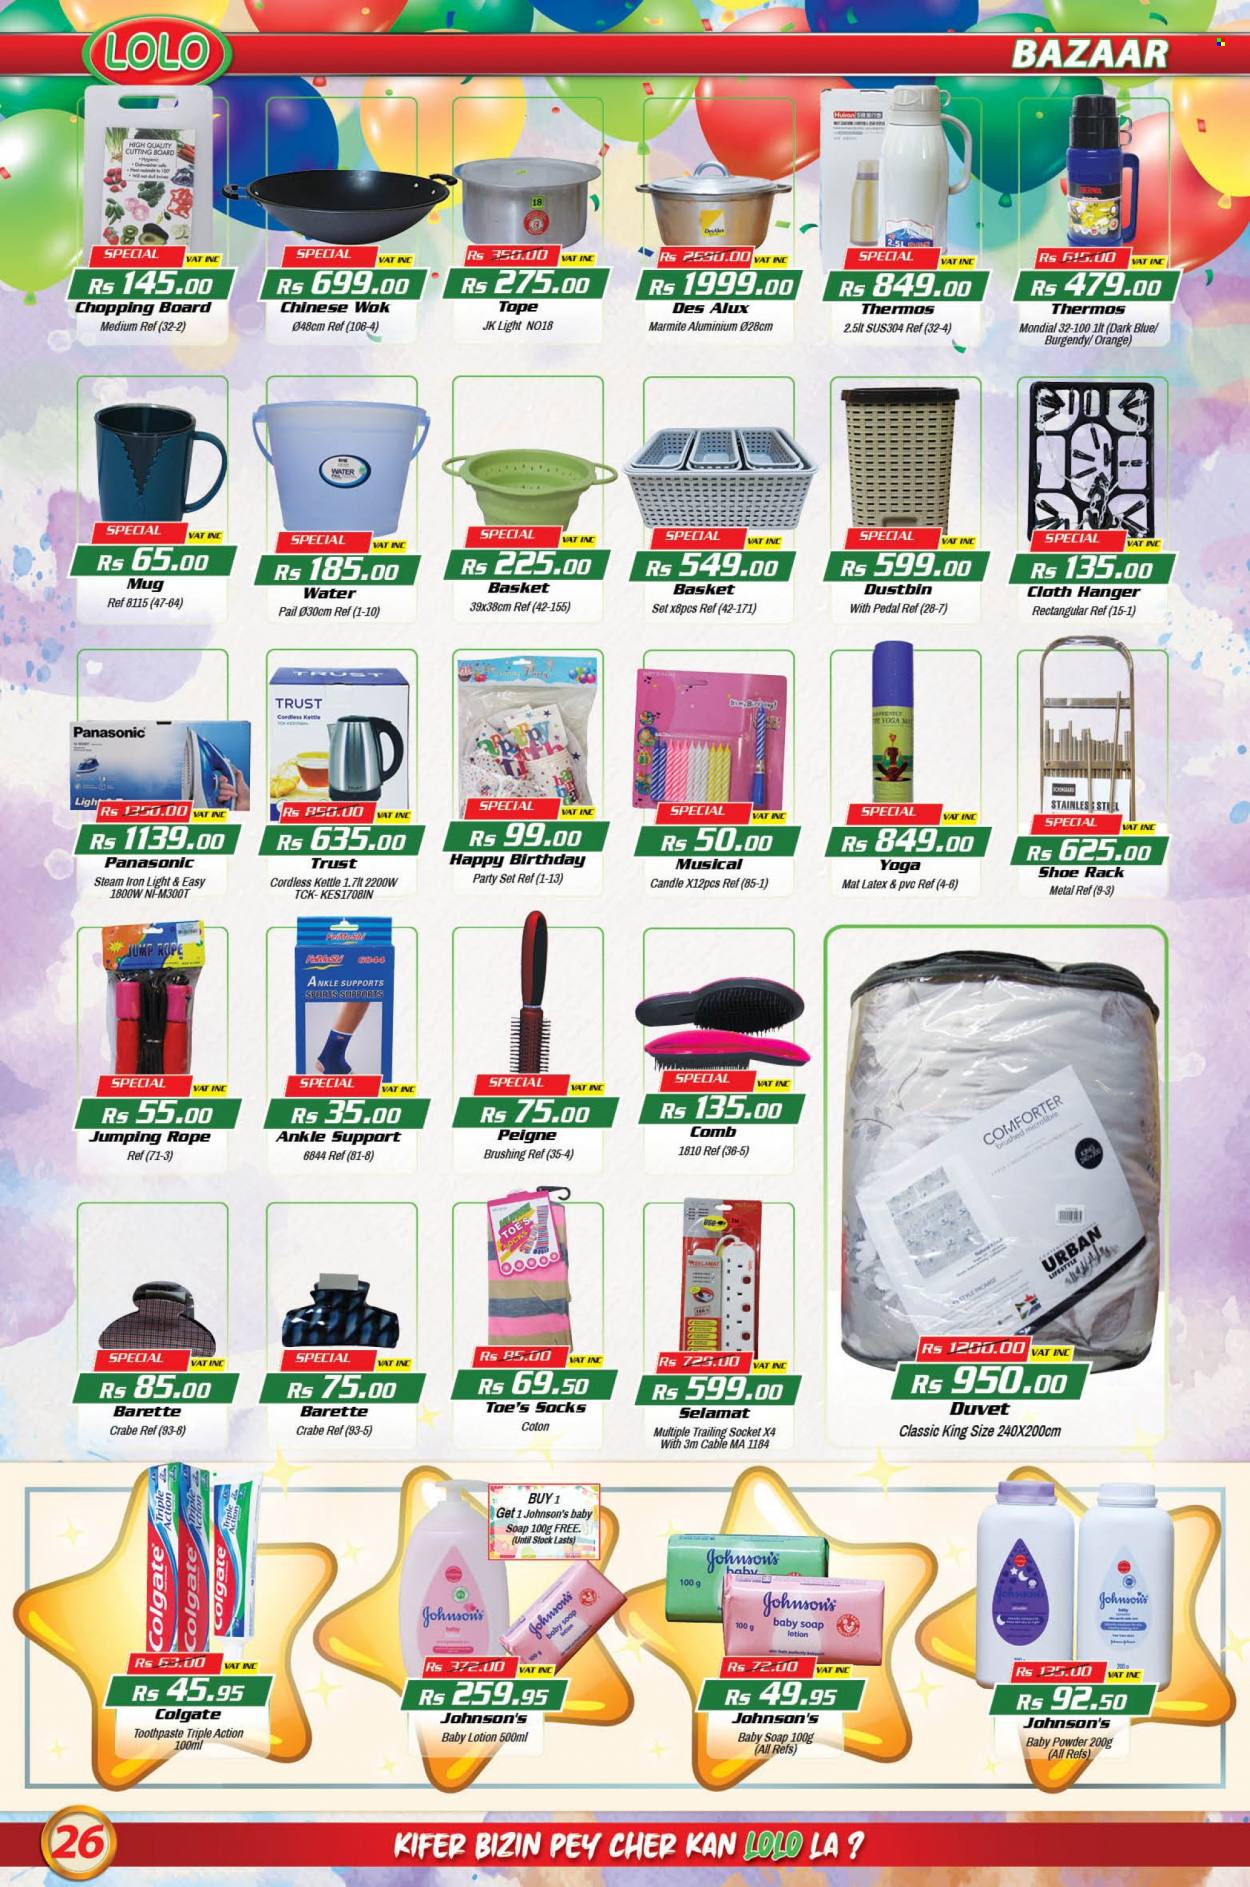 thumbnail - LOLO Hyper Catalogue - 26.07.2022 - 16.08.2022 - Sales products - Dole, oranges, Johnson's, baby powder, soap, toothpaste, comb, body lotion, Trust, basket, hanger, cutting board, mug, chopping board, wok, candle, socks, Colgate, Panasonic. Page 26.